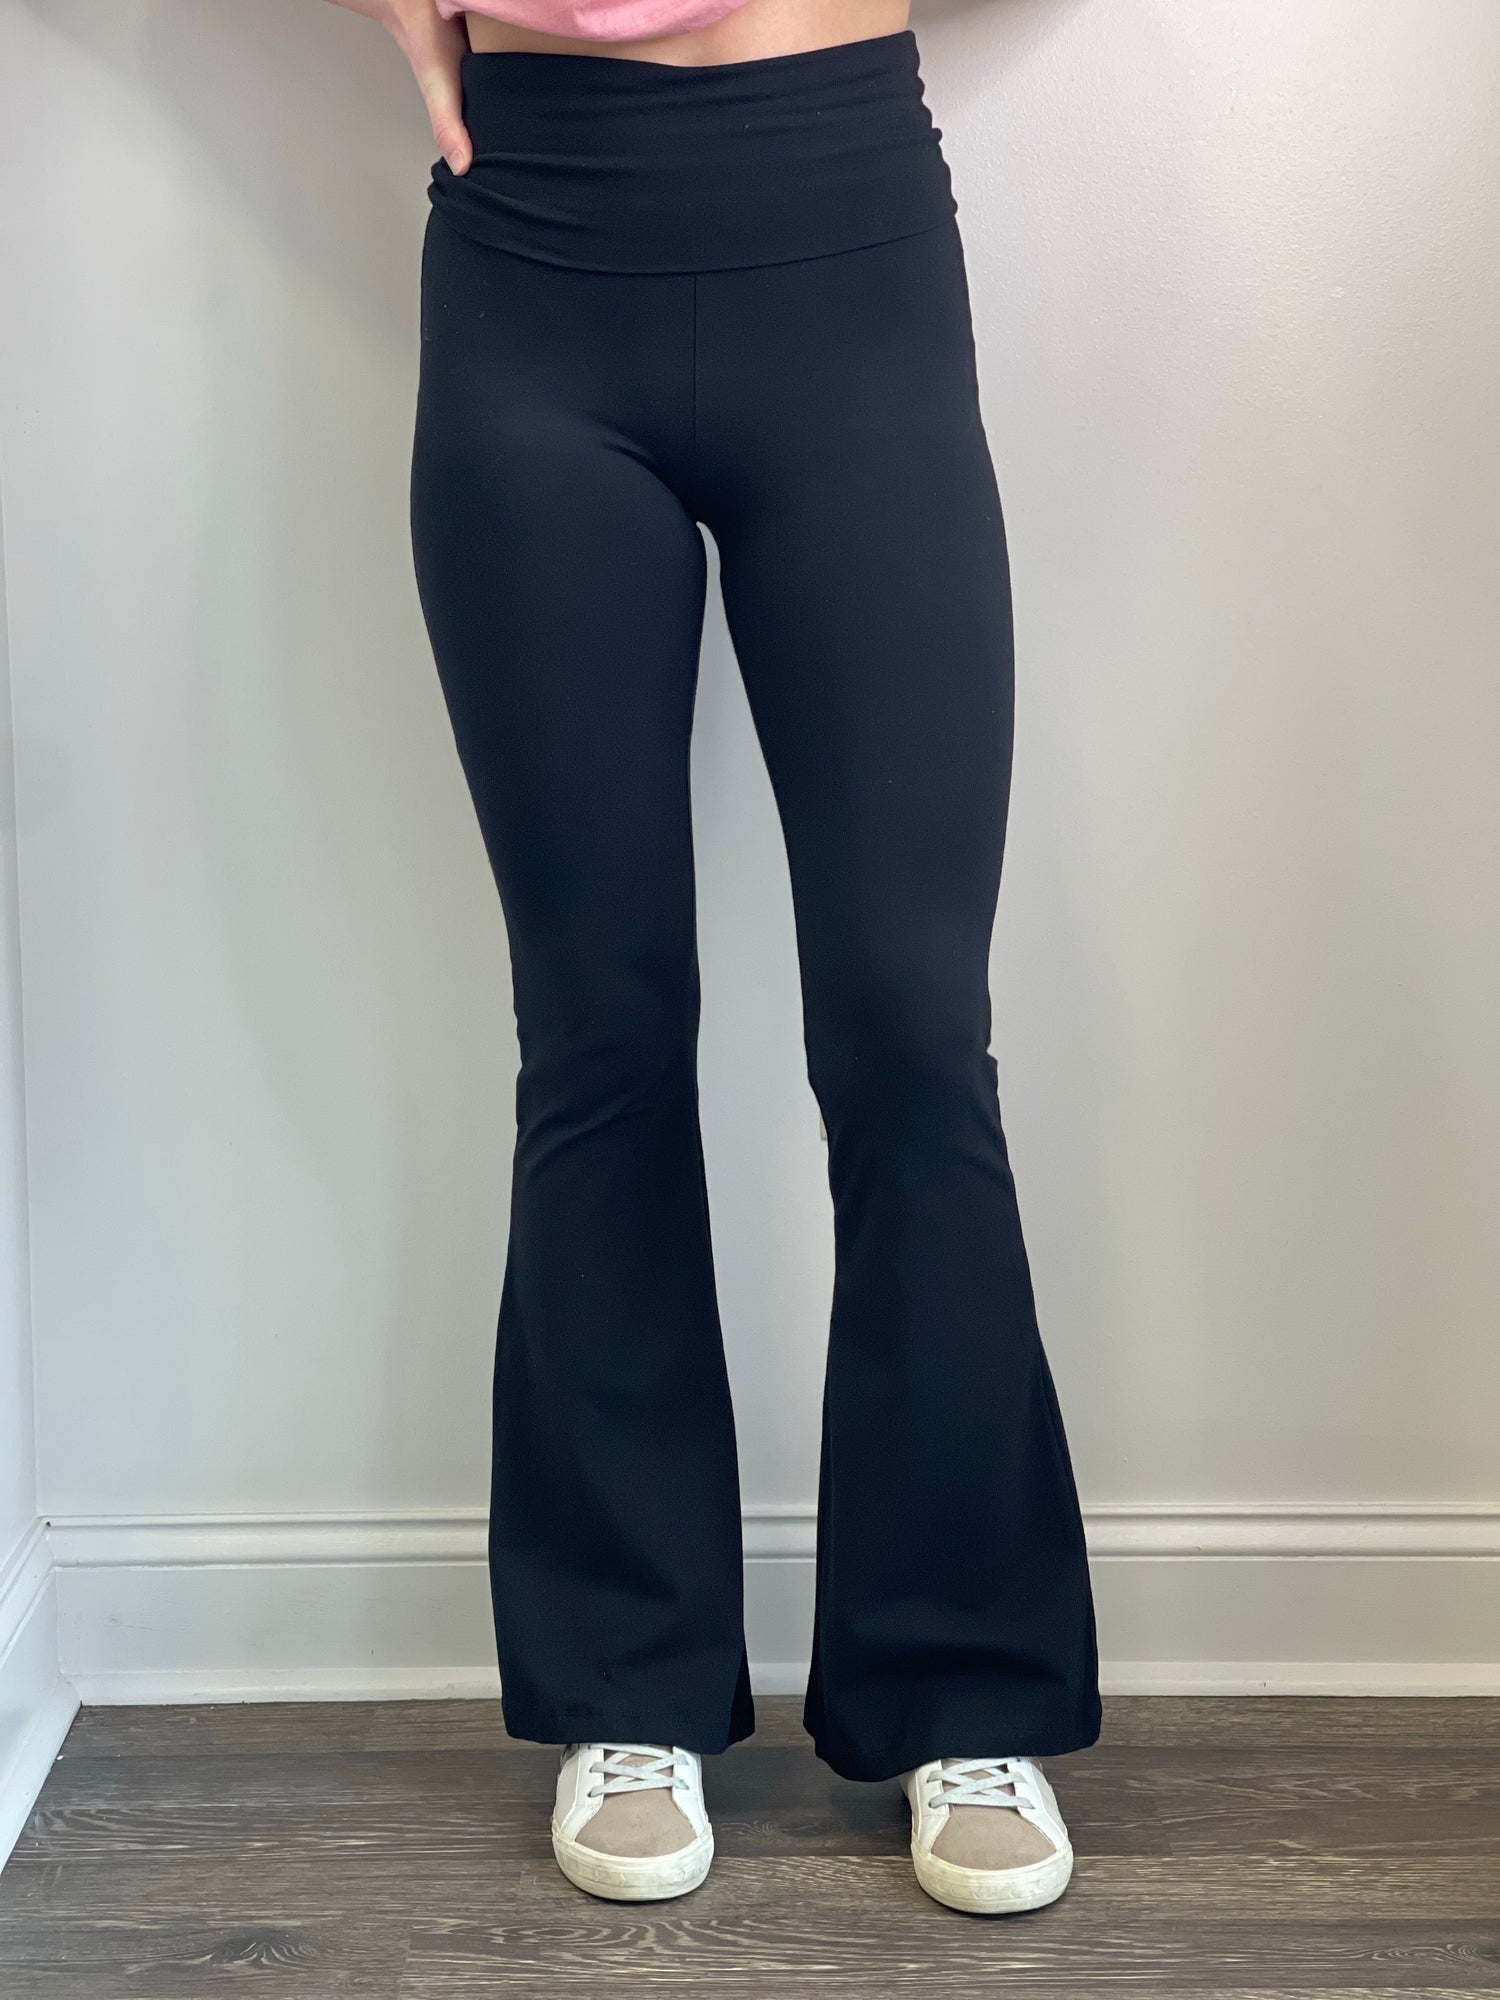 Gray So Low fold over waistband flare yoga stretch pants size